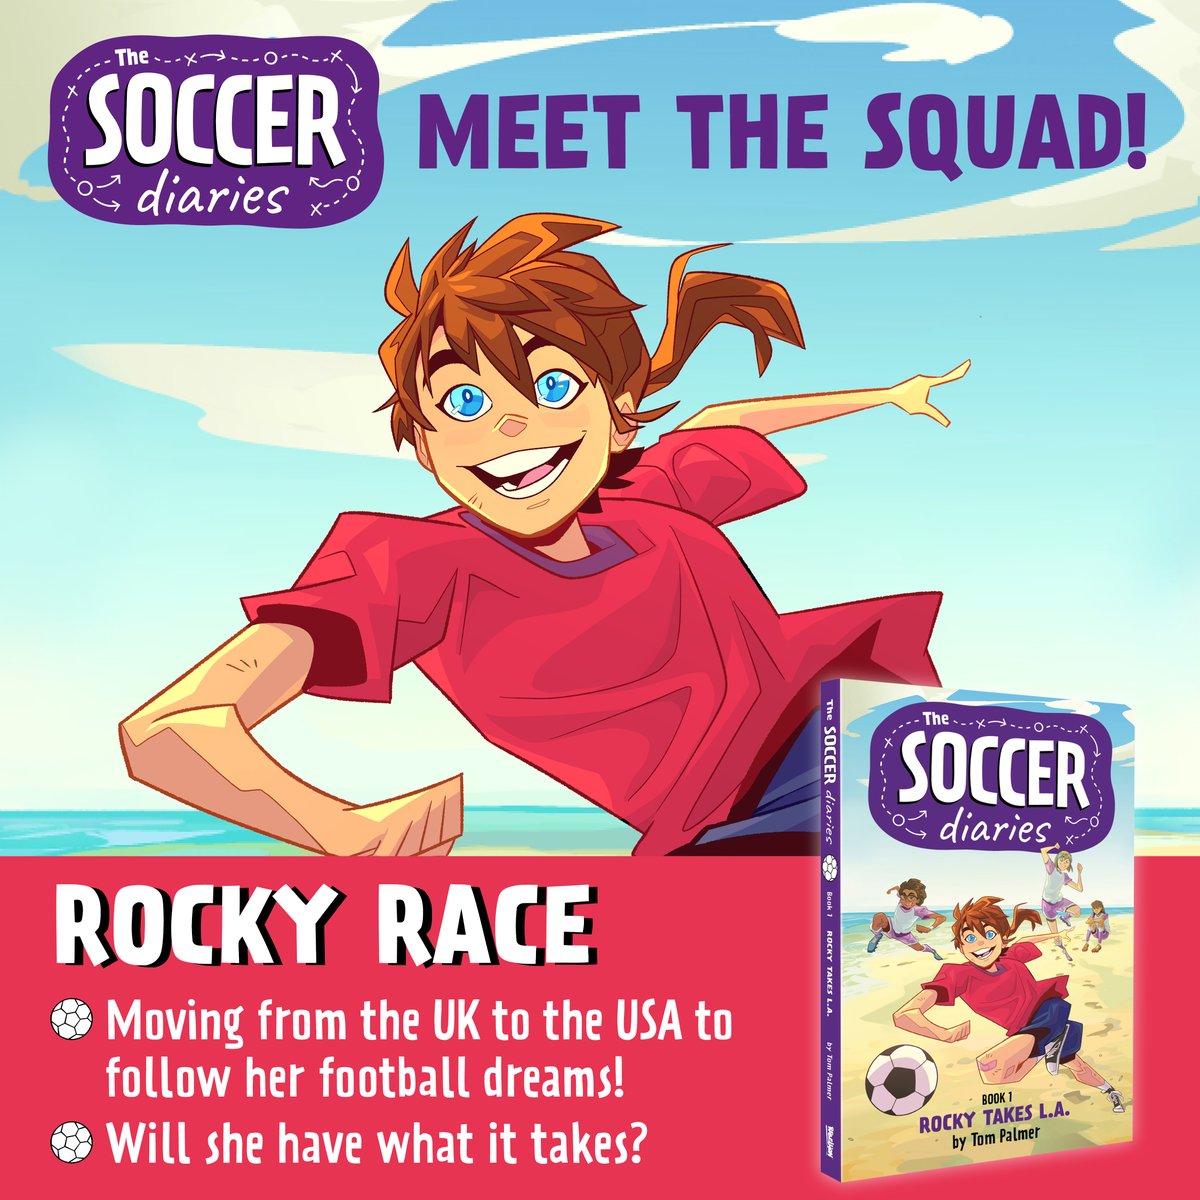 It's the star of THE SOCCER DIARIES - Rocky Race! She's off to the USA to pursue her football dreams by playing at a prestigious soccer camp! But does she have what it takes? Read The Soccer Diaries: Rocky Takes L.A. to find out! Available now: reb.to/TheSoccerDiari…